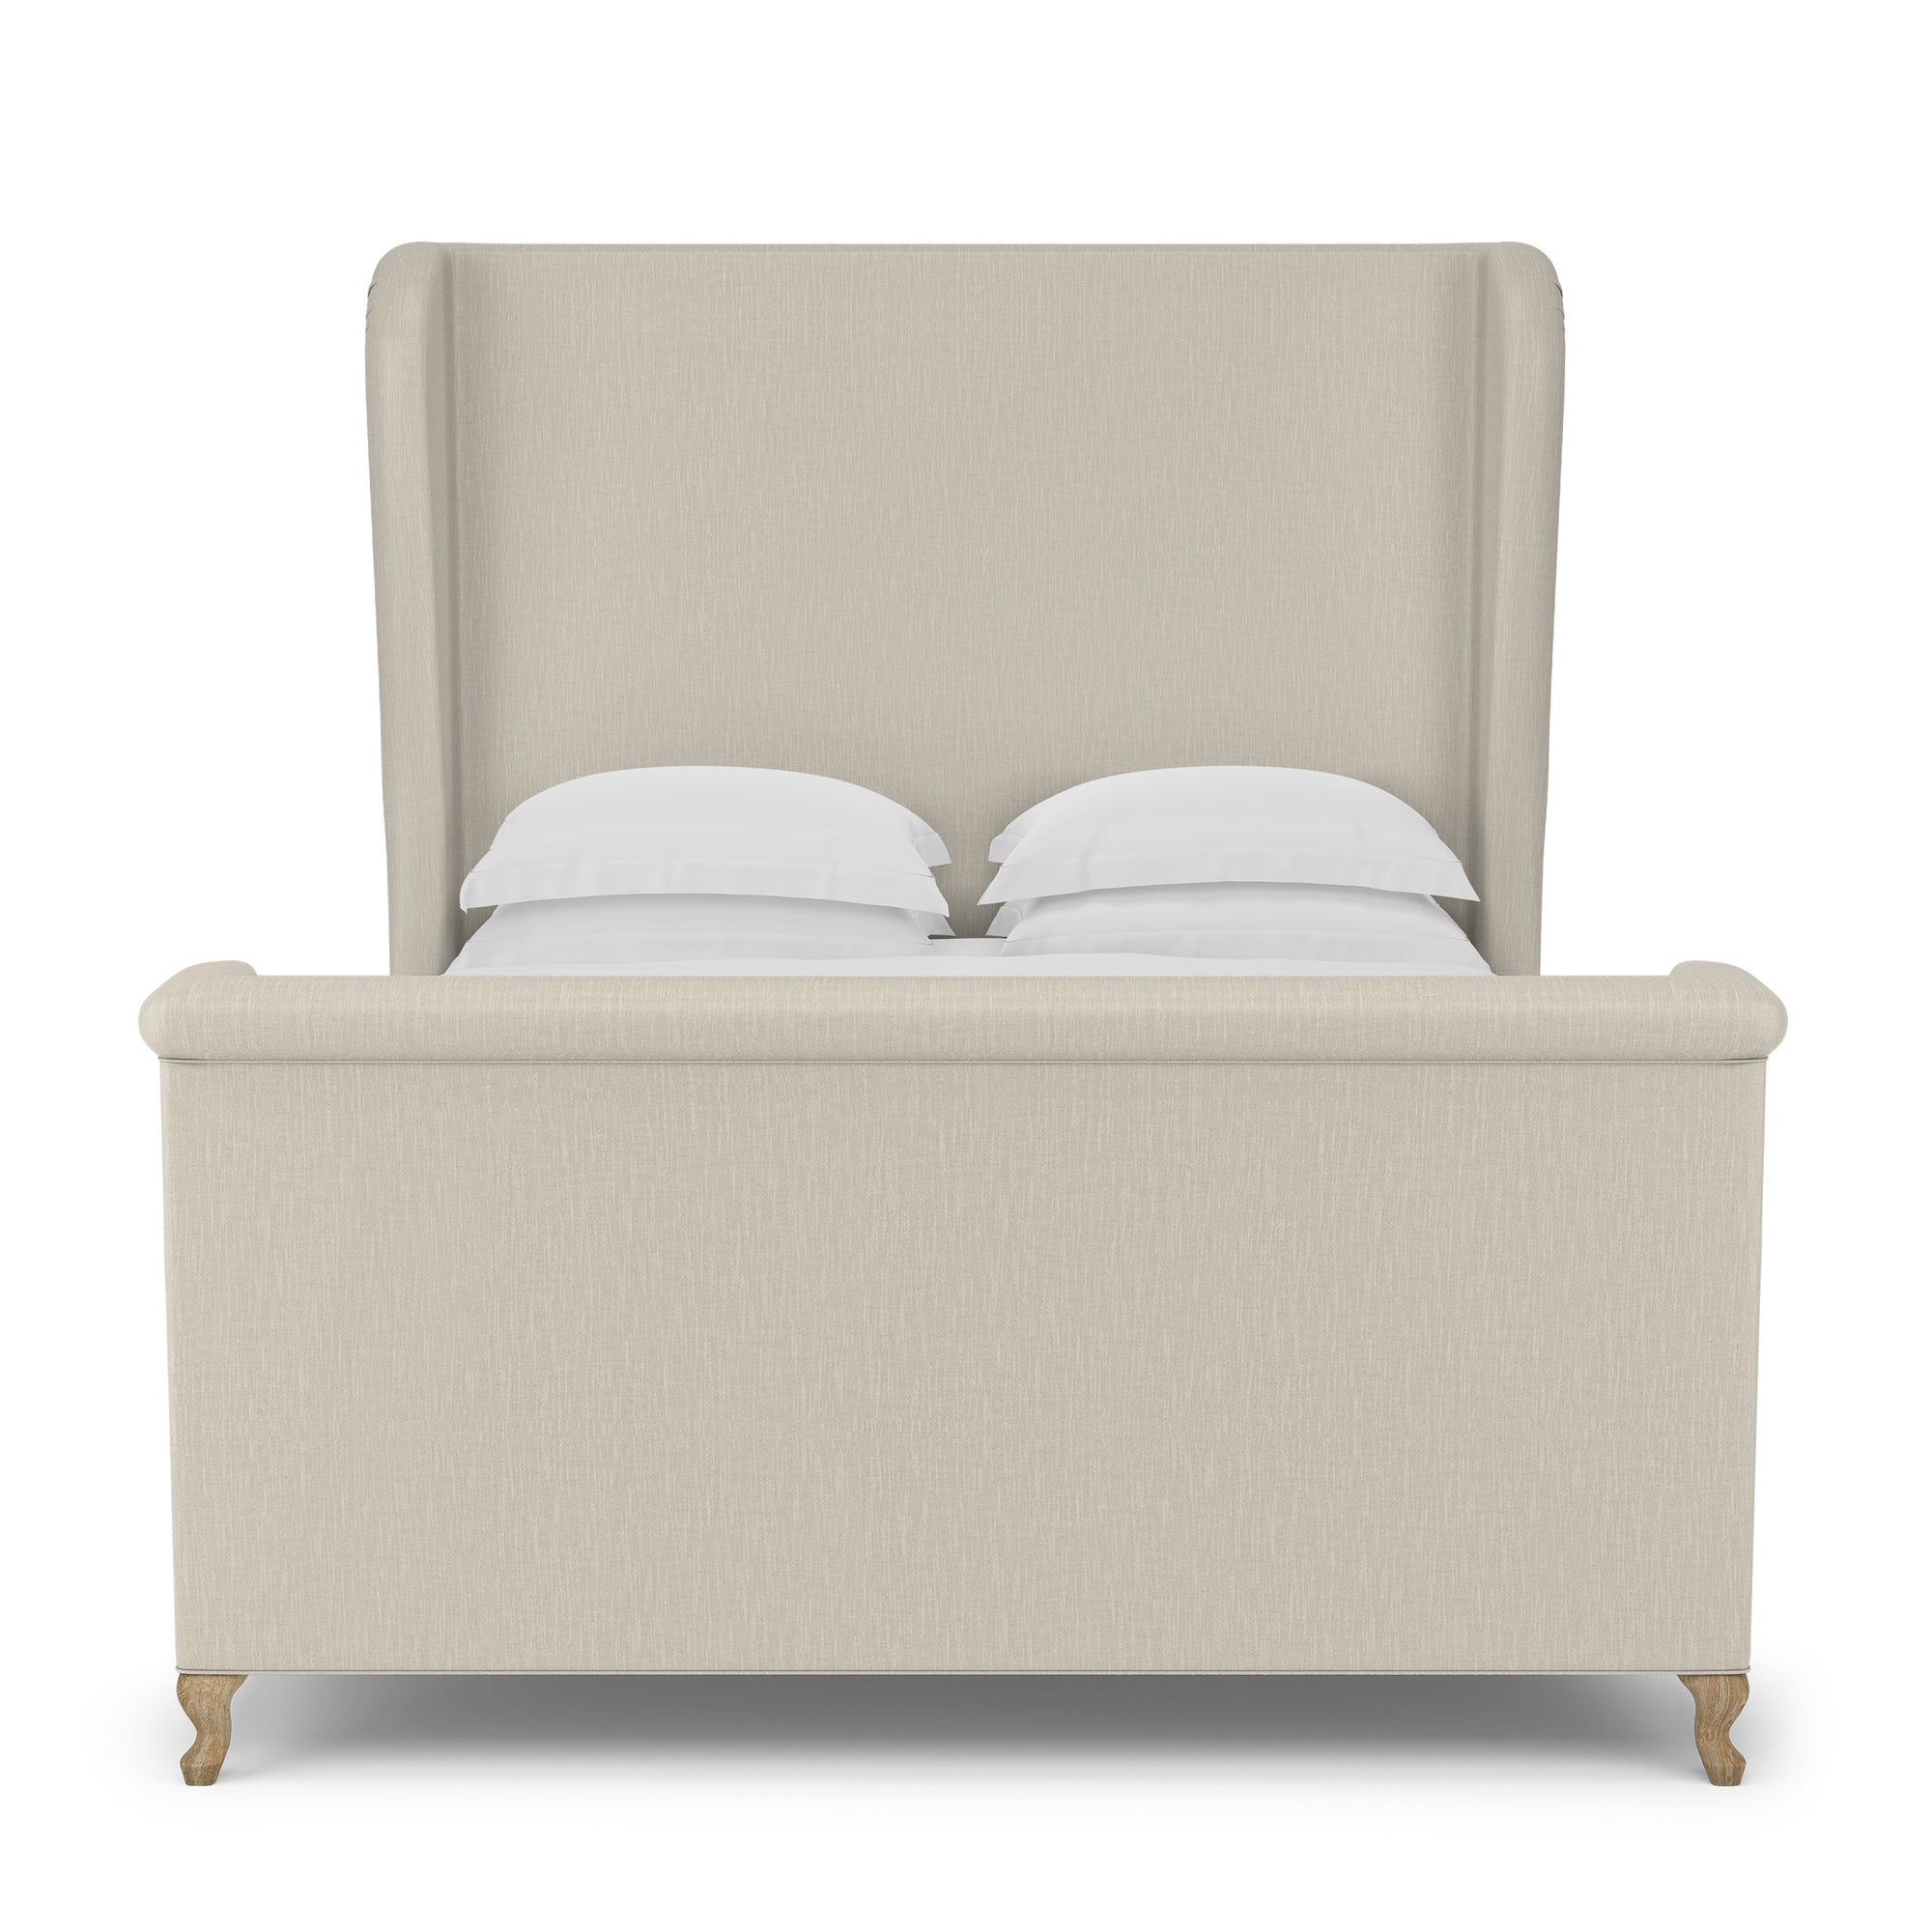 Humboldt Shelter Bed w/ Footboard - Oyster Box Weave Linen